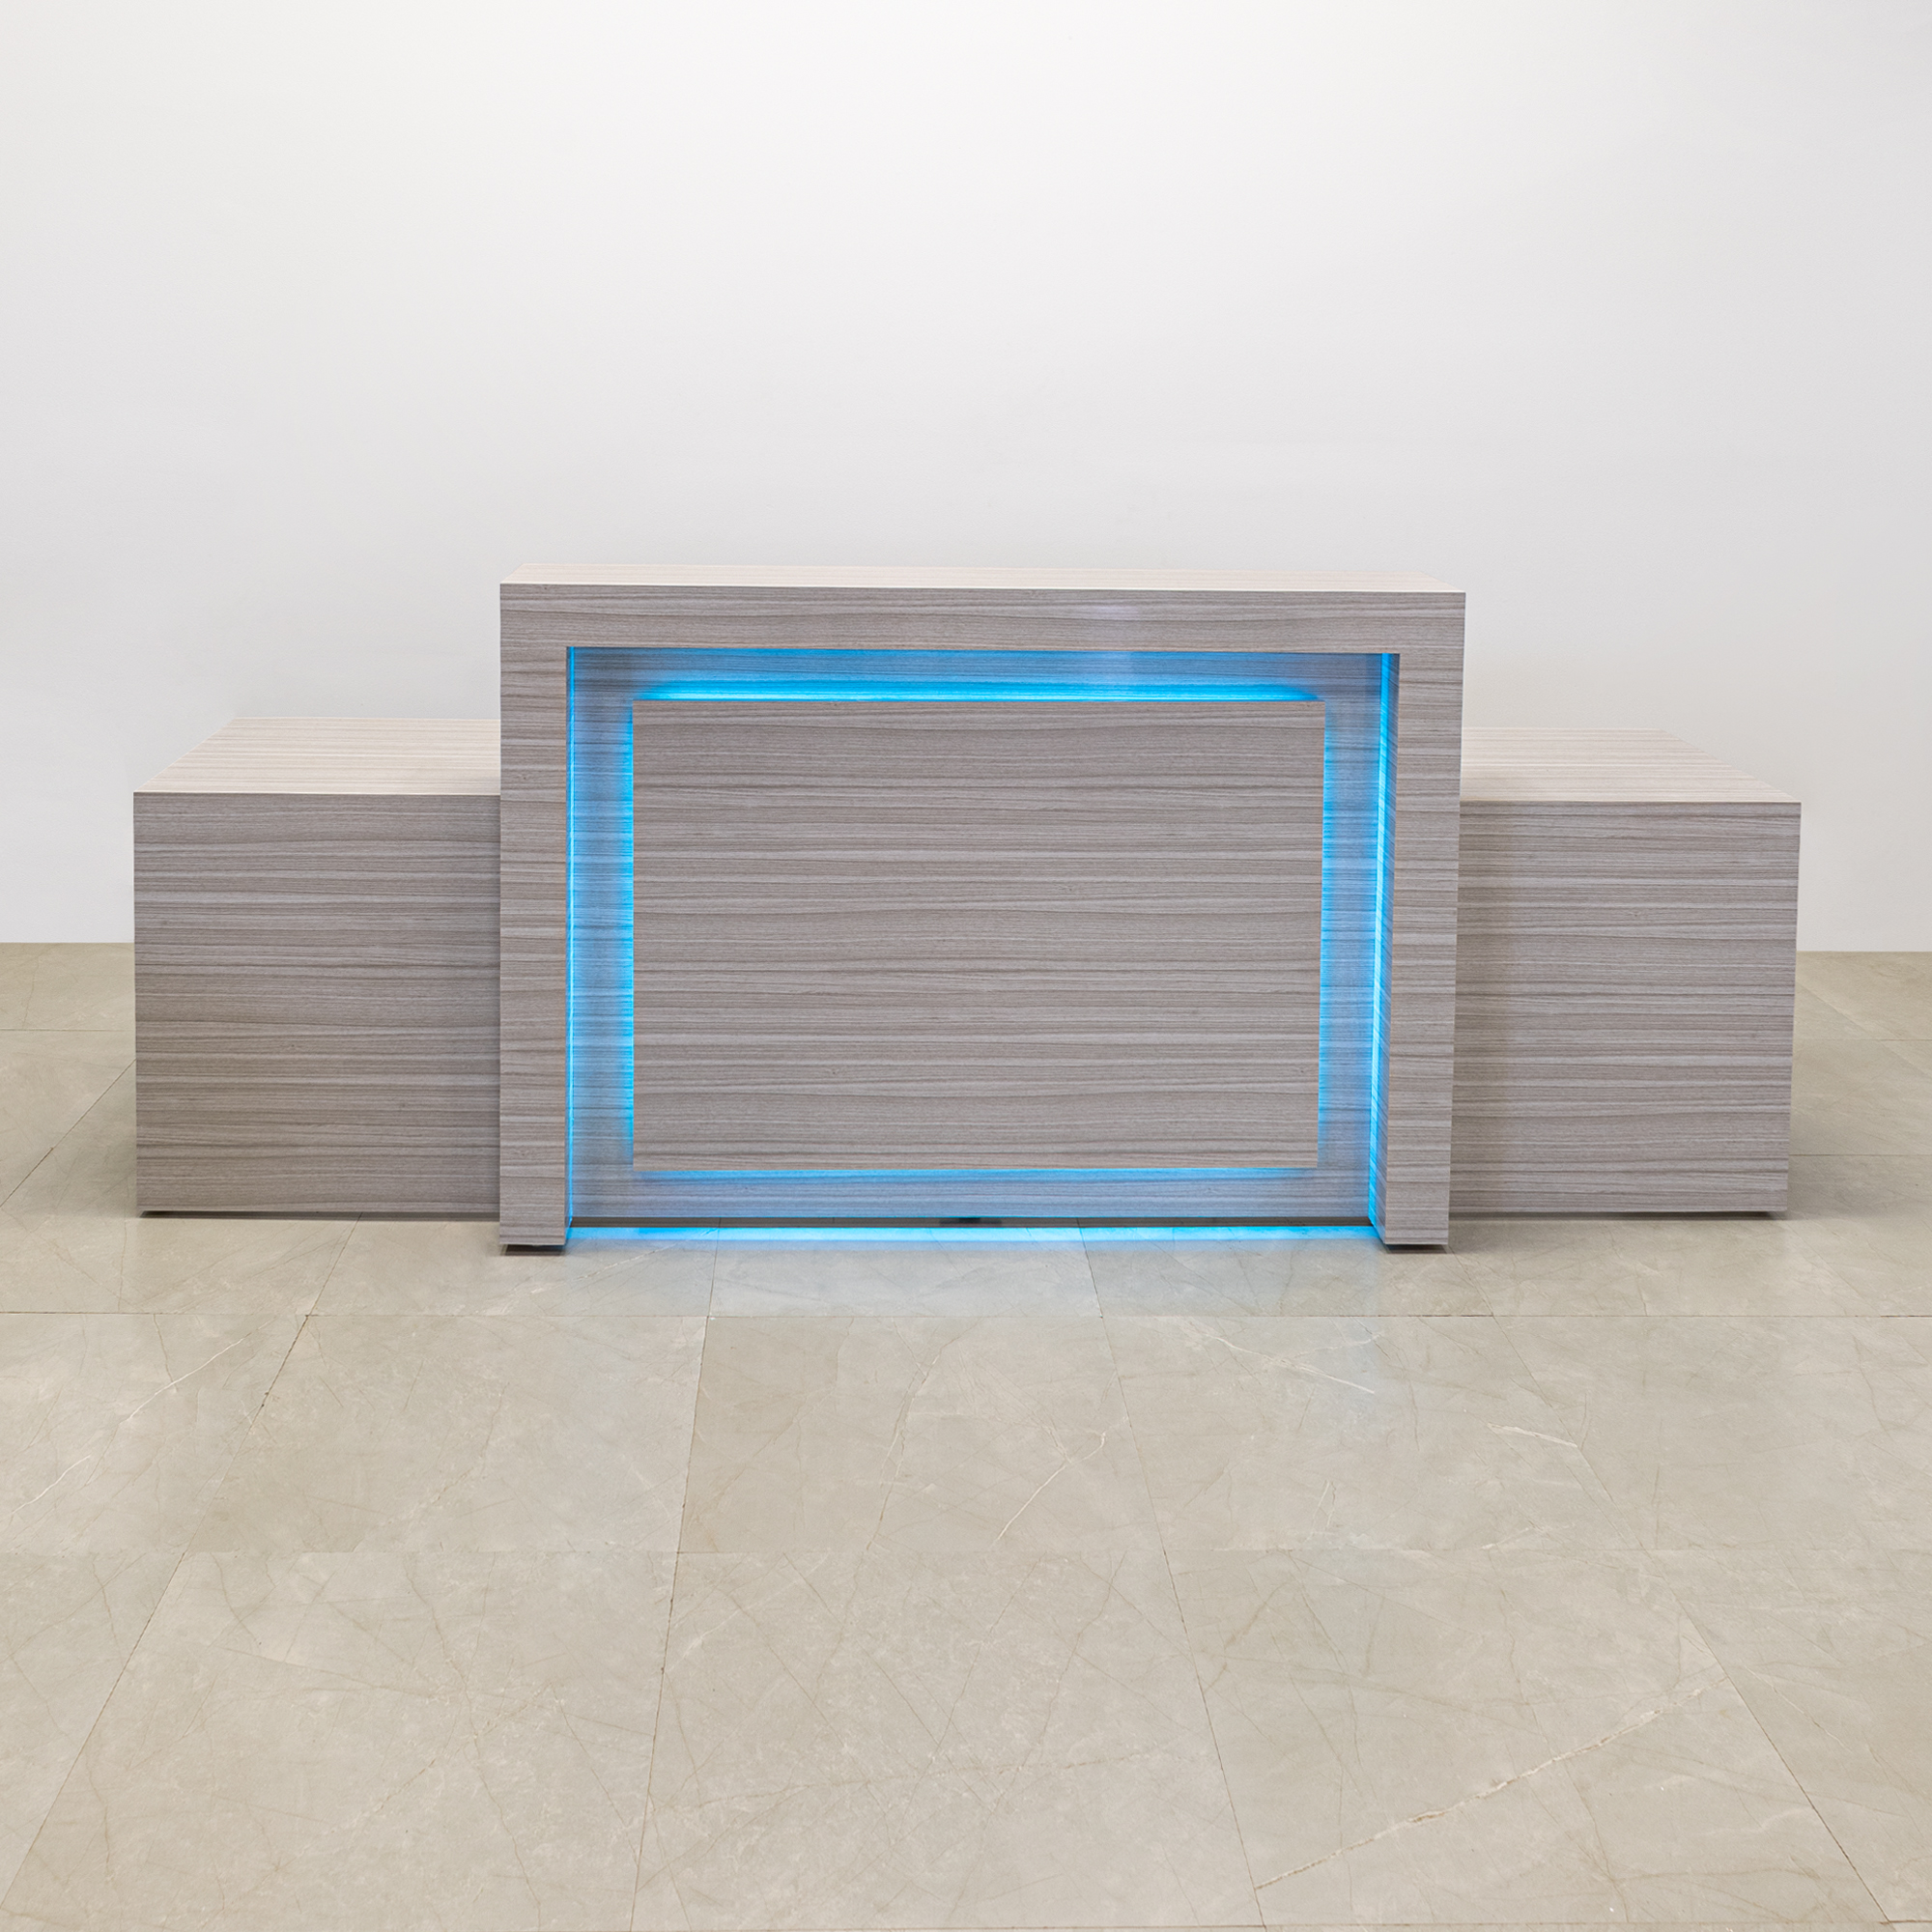 108-inch New York Extra Wide Custom Reception Desk in riviera gloss laminate counter, front panel, and desk, with multi-colored LED, shown here.